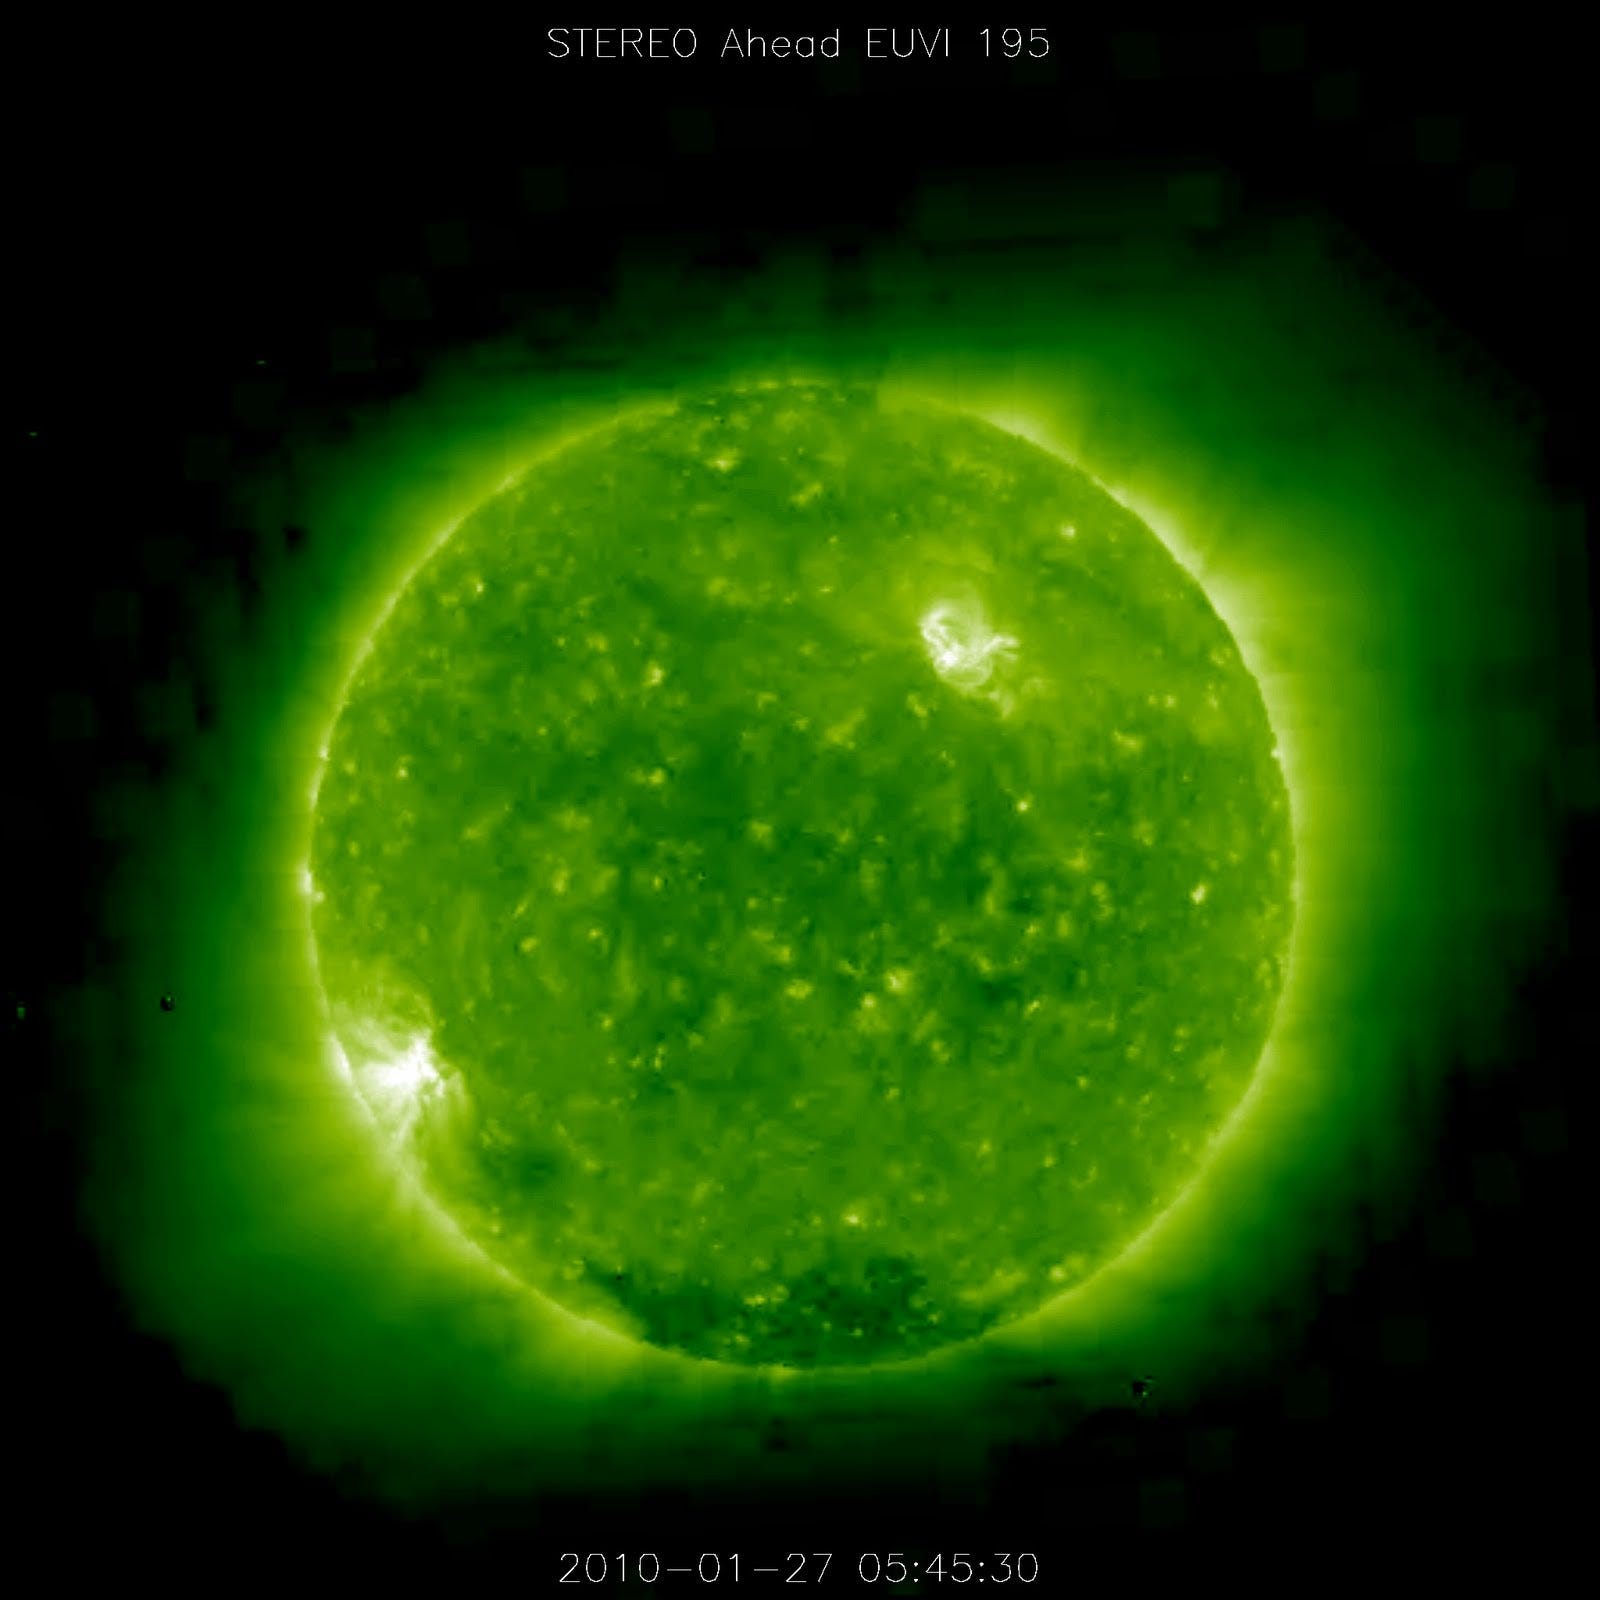 Earth-Sized Spherical Objects Inside Corona of SUN?—?NASA Images